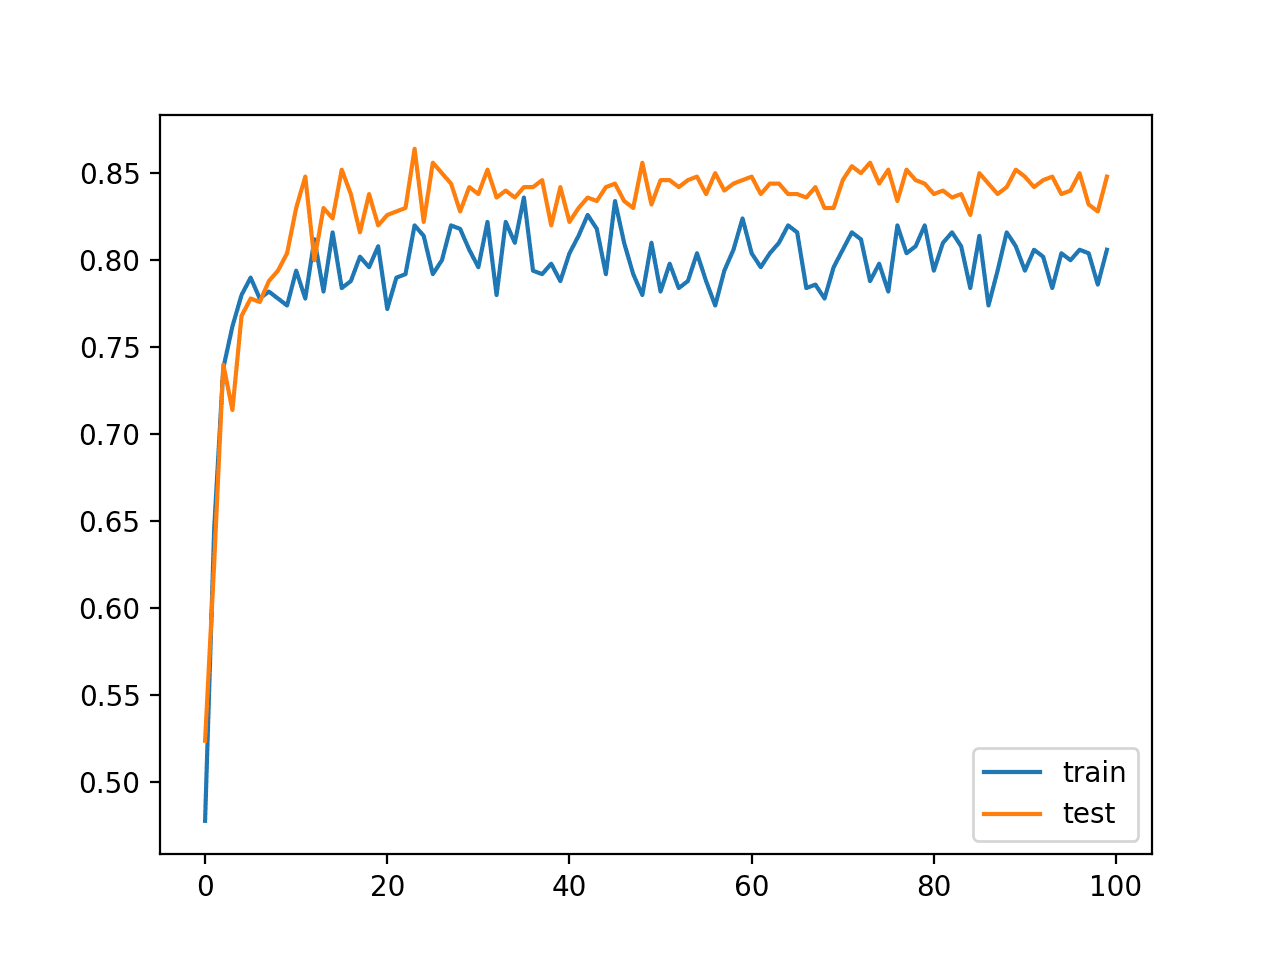 Line Plot Classification Accuracy of MLP With Batch Normalization After Activation Function on Train and Test Datasets Over Training Epochs